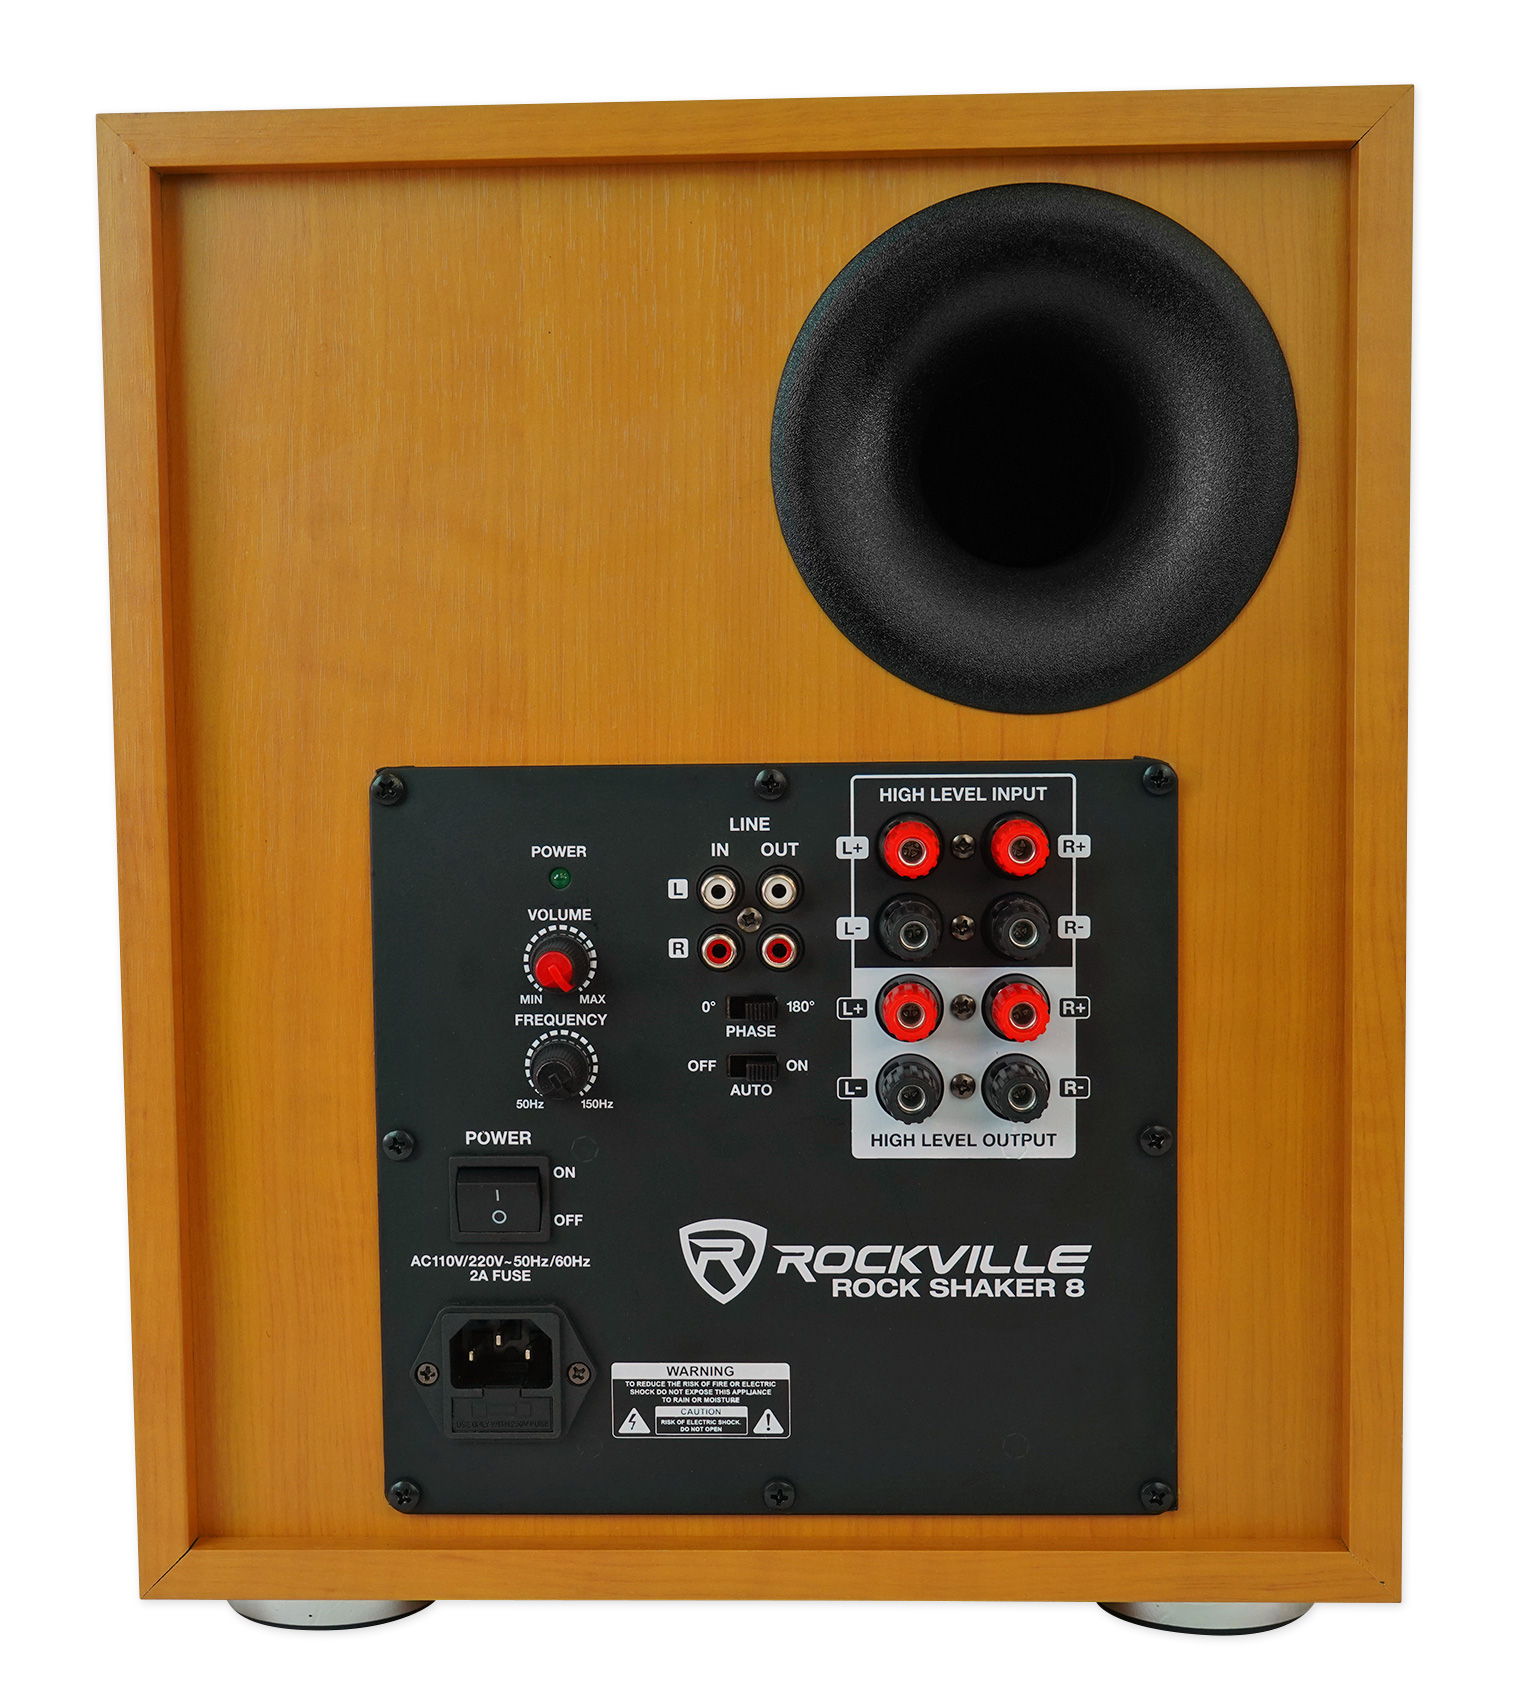 Rockville Rock Shaker 8" Classic Wood 400w Powered Home Theater Subwoofer Sub - image 5 of 10